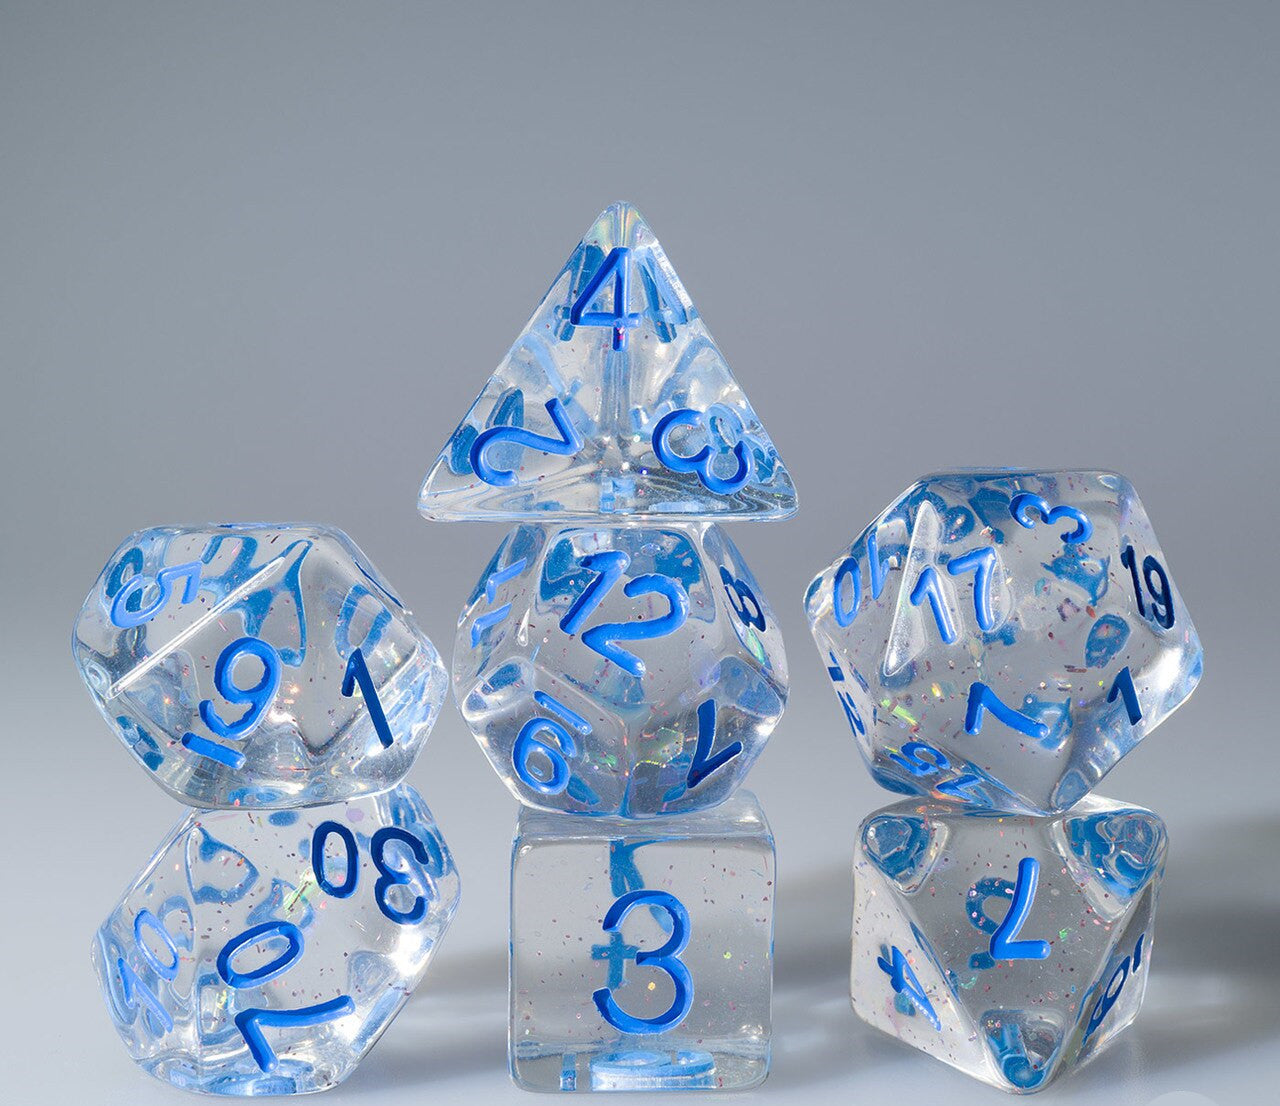 Fine Glitter Clear Dice with Blue Ink 7pc Polyhedral Dice Set